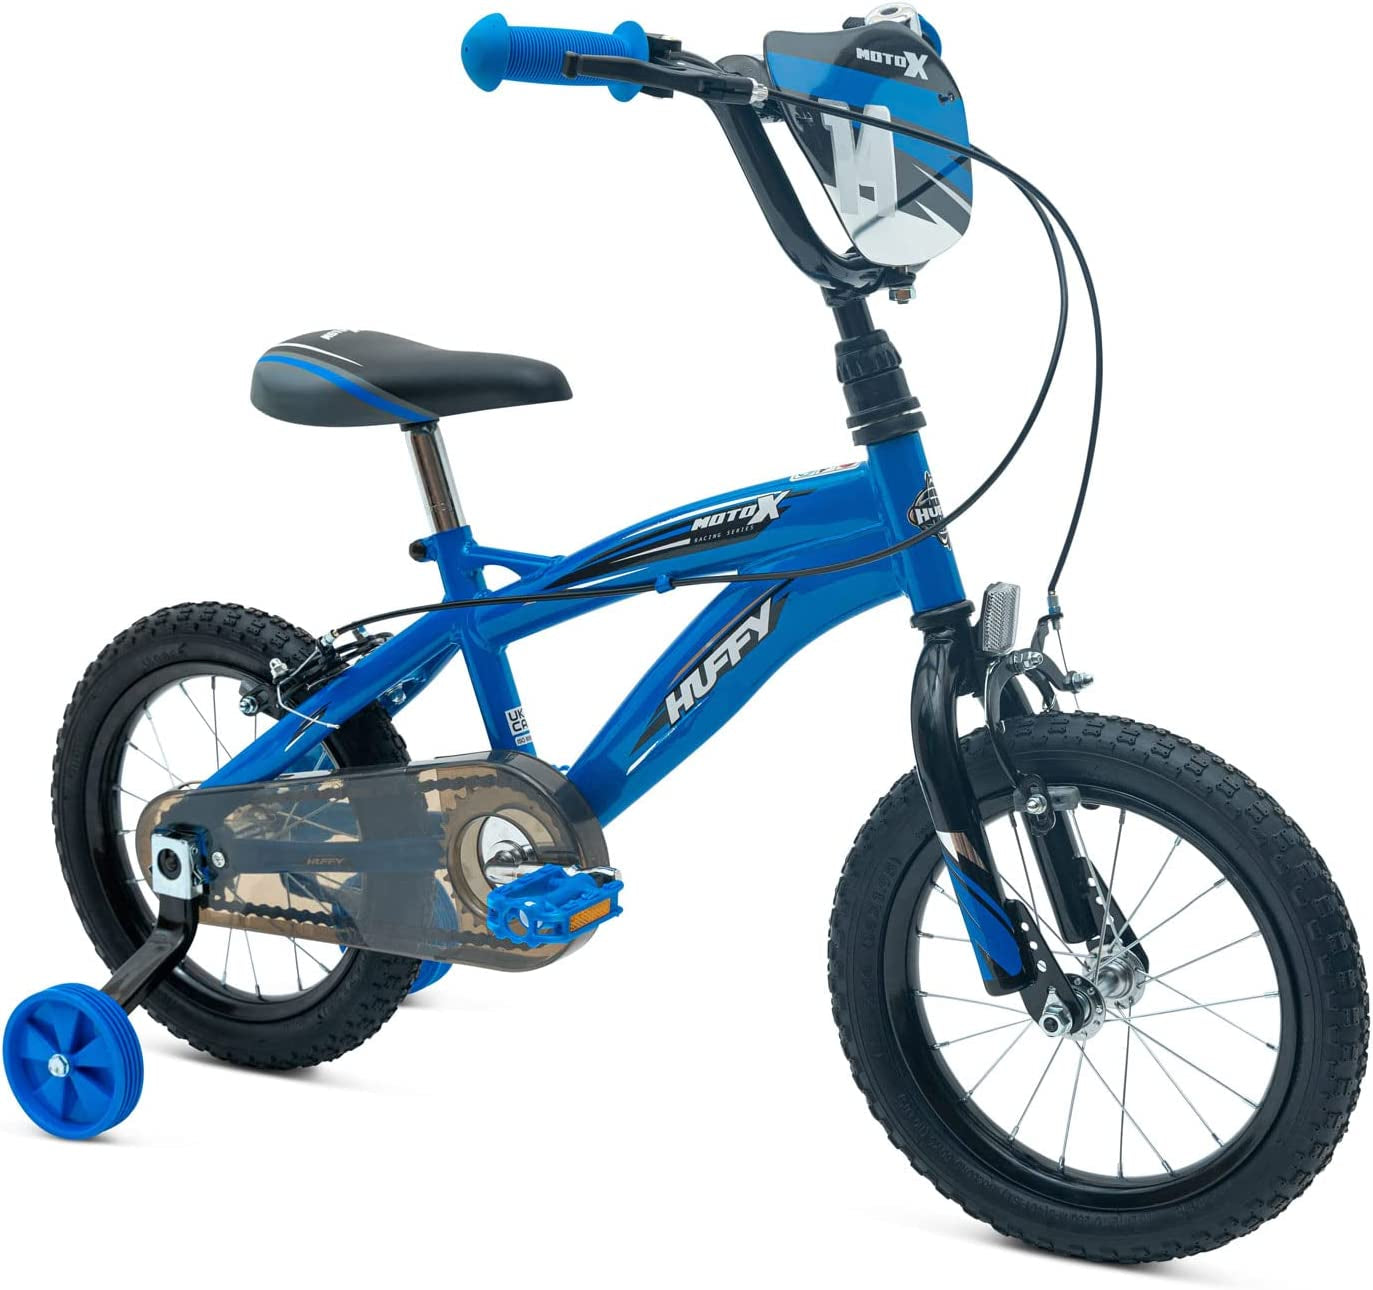 Moto X Boys Bike 12, 14, 16, 18 Inch Wheels Multiple Colours with BMX Styling